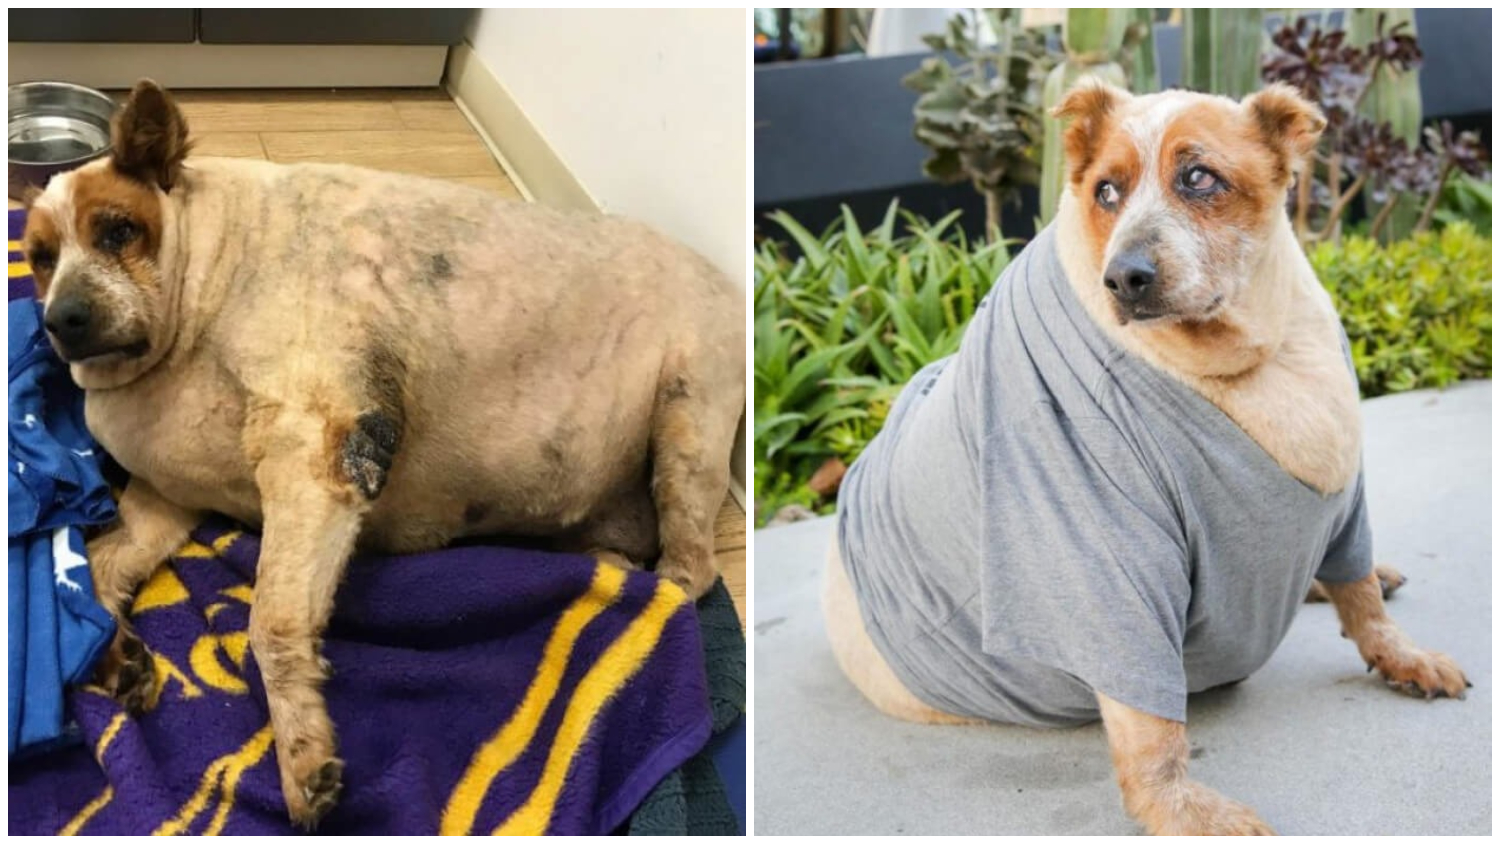 Abandoned Obese Dog Has a New and Fulfilling Life After Being Adopted by Actress Jane Lynch